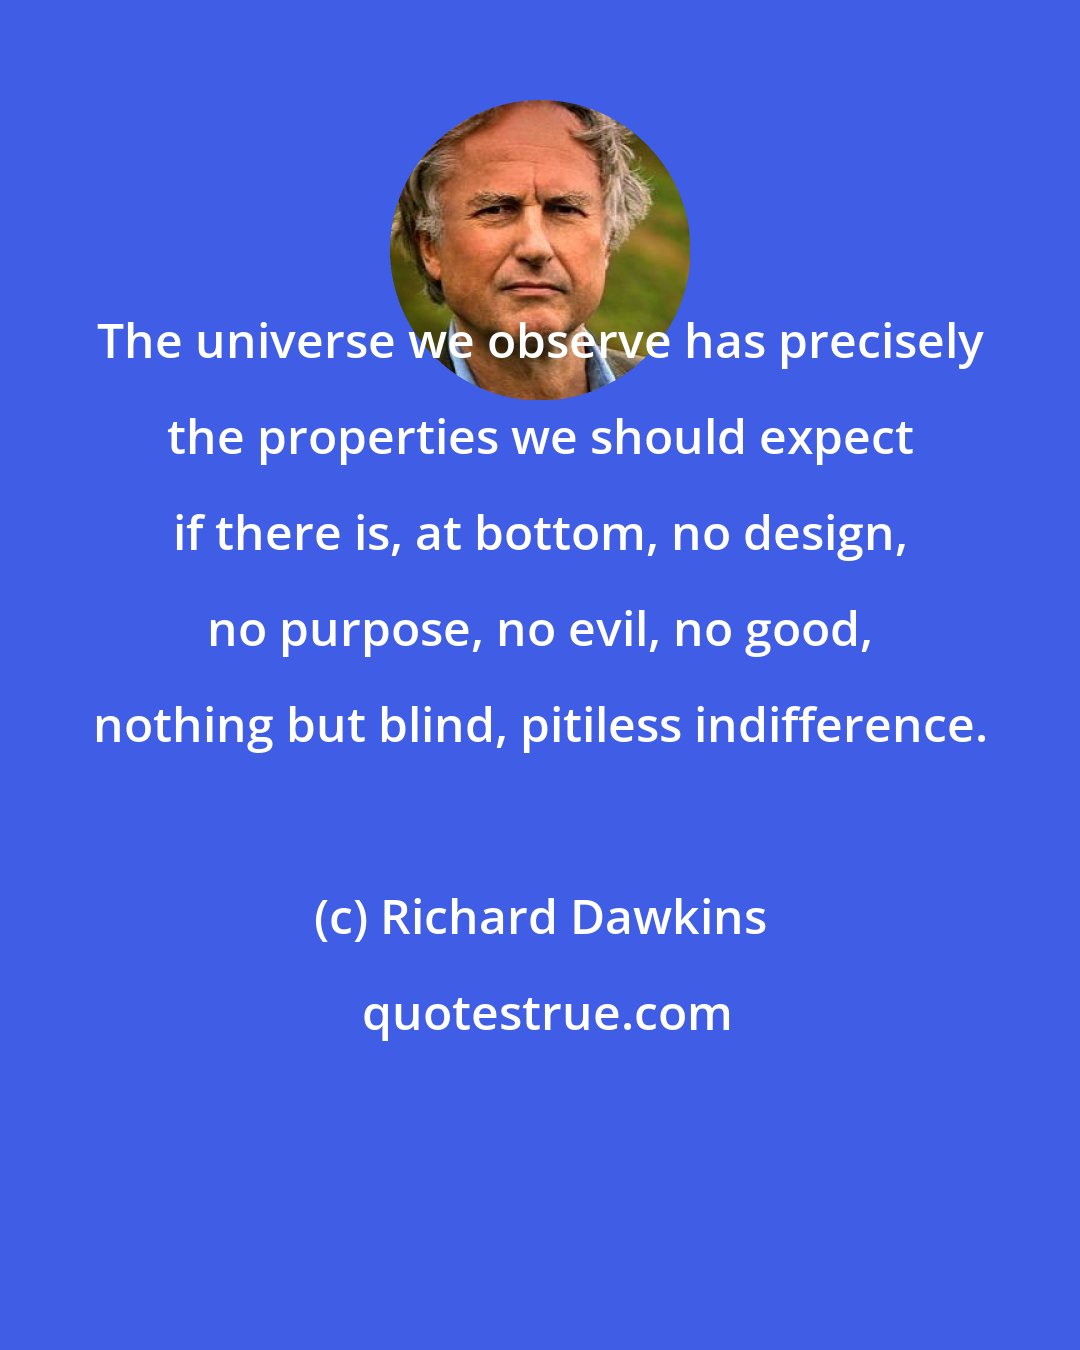 Richard Dawkins: The universe we observe has precisely the properties we should expect if there is, at bottom, no design, no purpose, no evil, no good, nothing but blind, pitiless indifference.